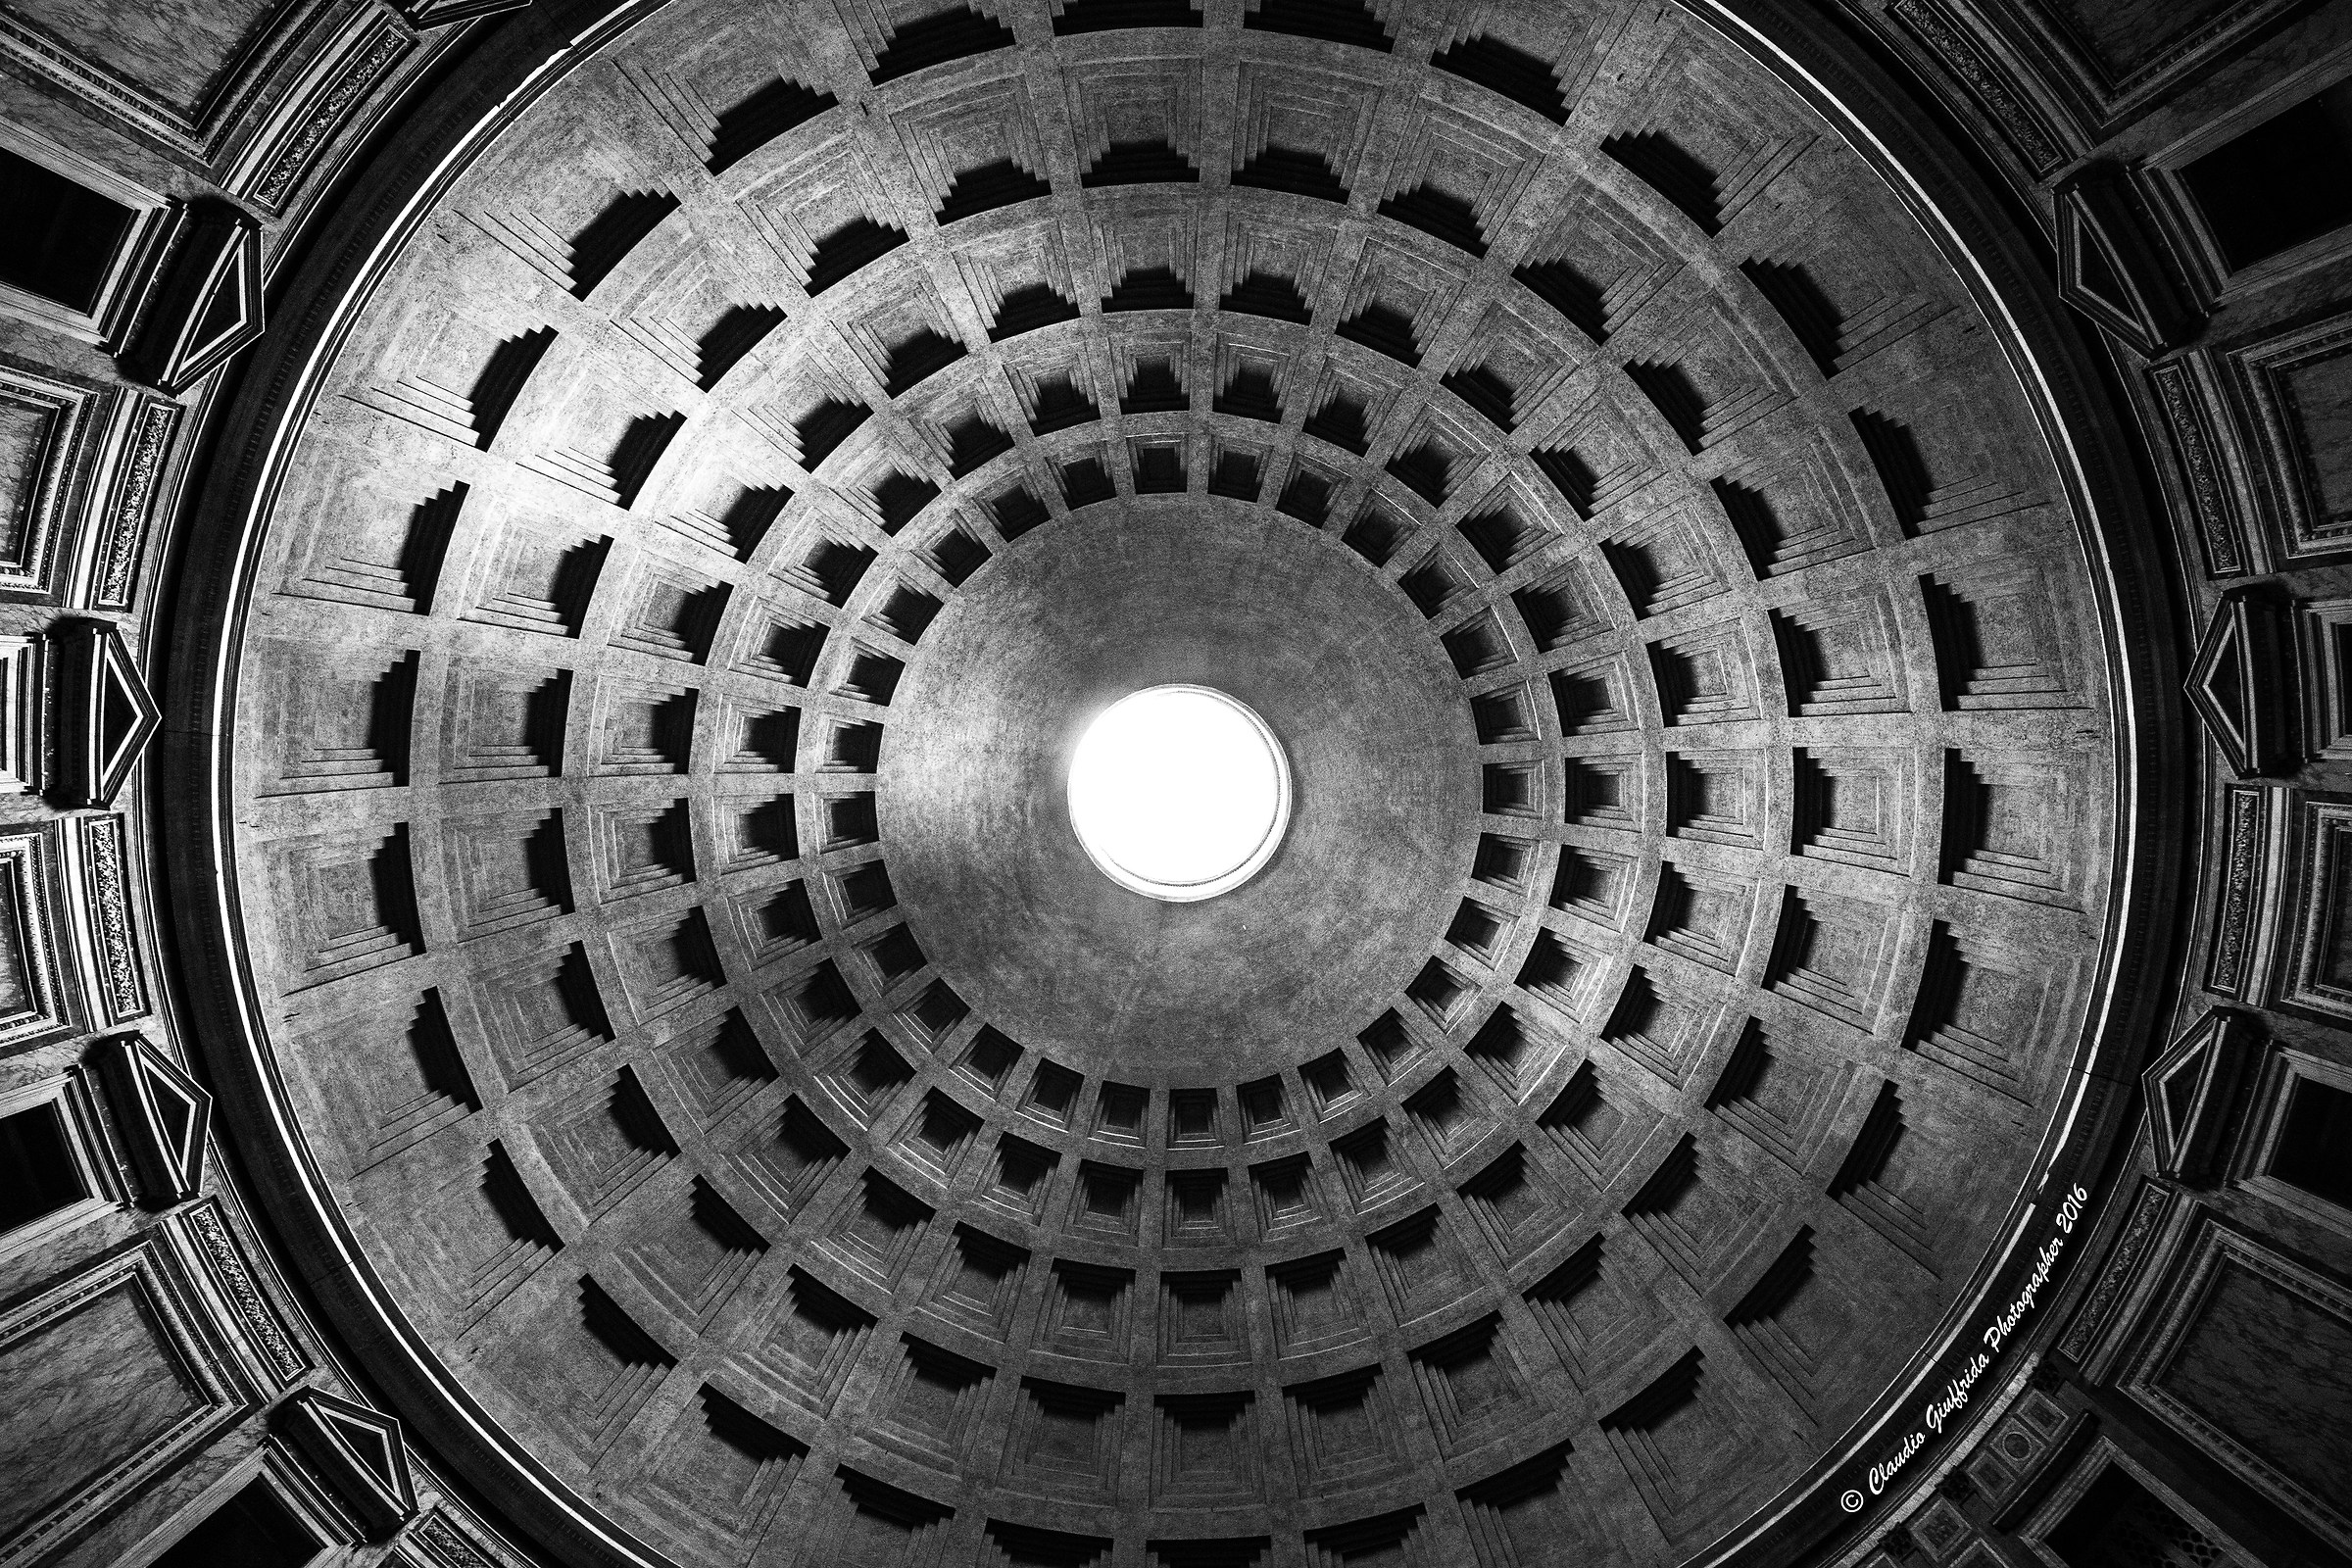 the dome of the Pantheon...